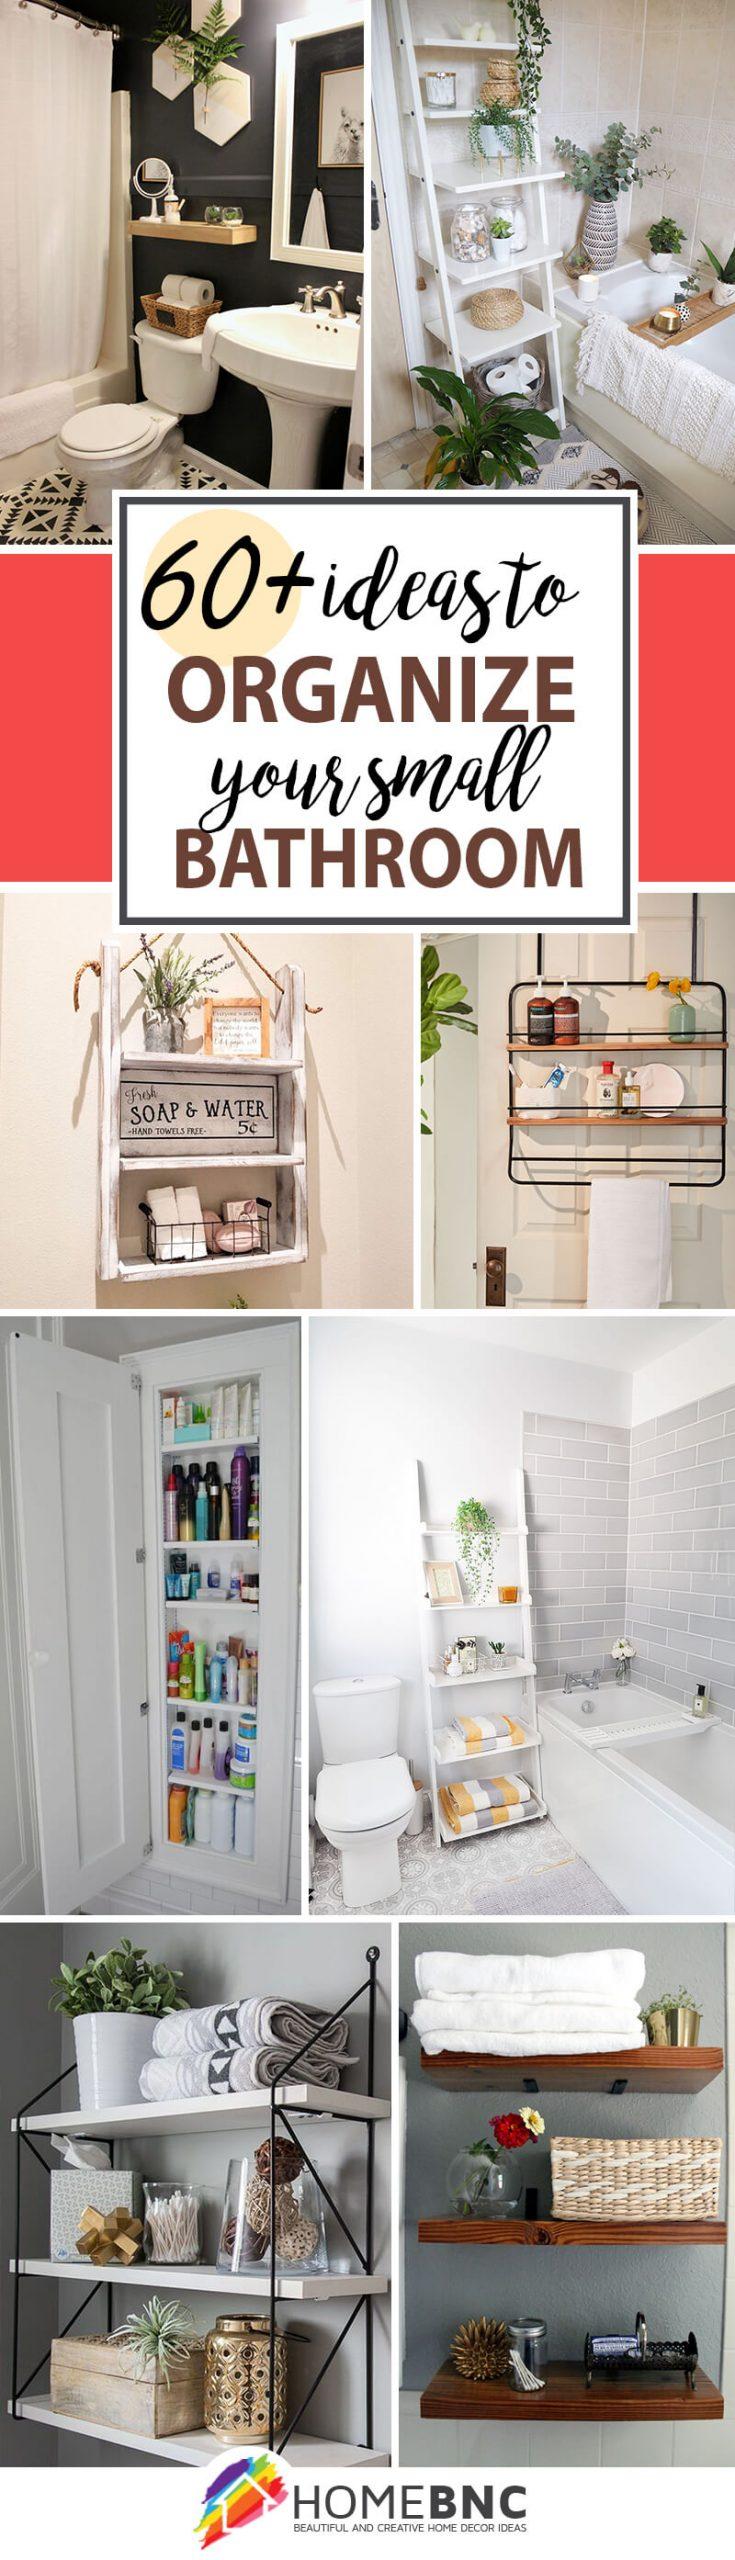 The Space-Saving Trick for Creating More Storage in a Small Bathroom 